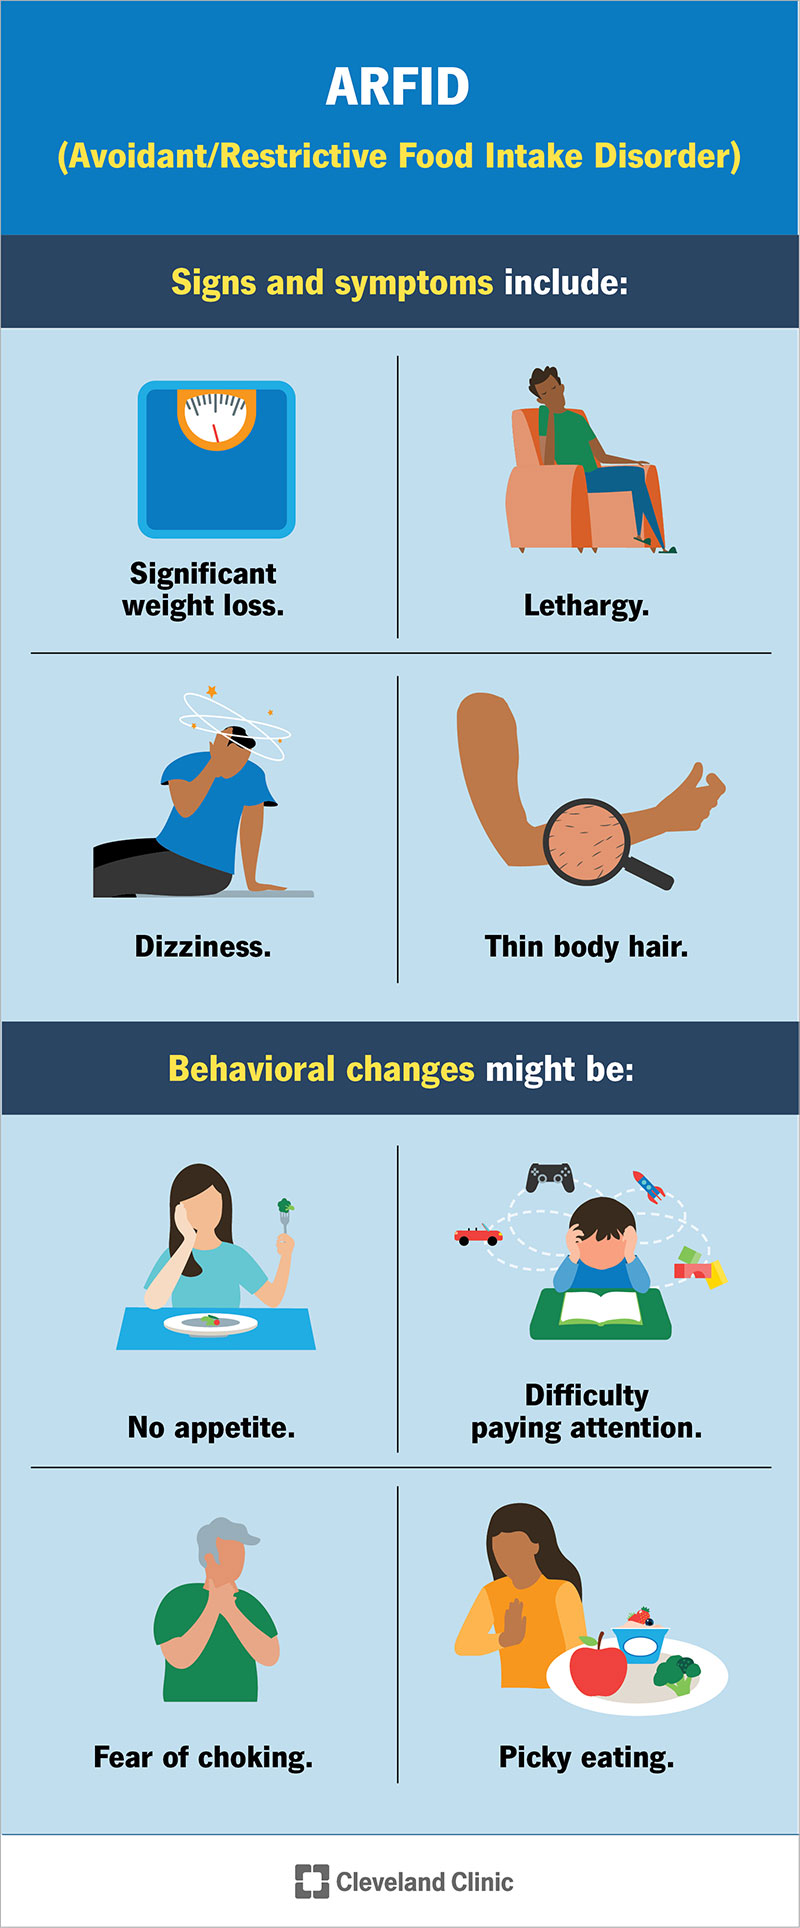 Signs and symptoms and behavioral changes that happen as a result of ARFID.